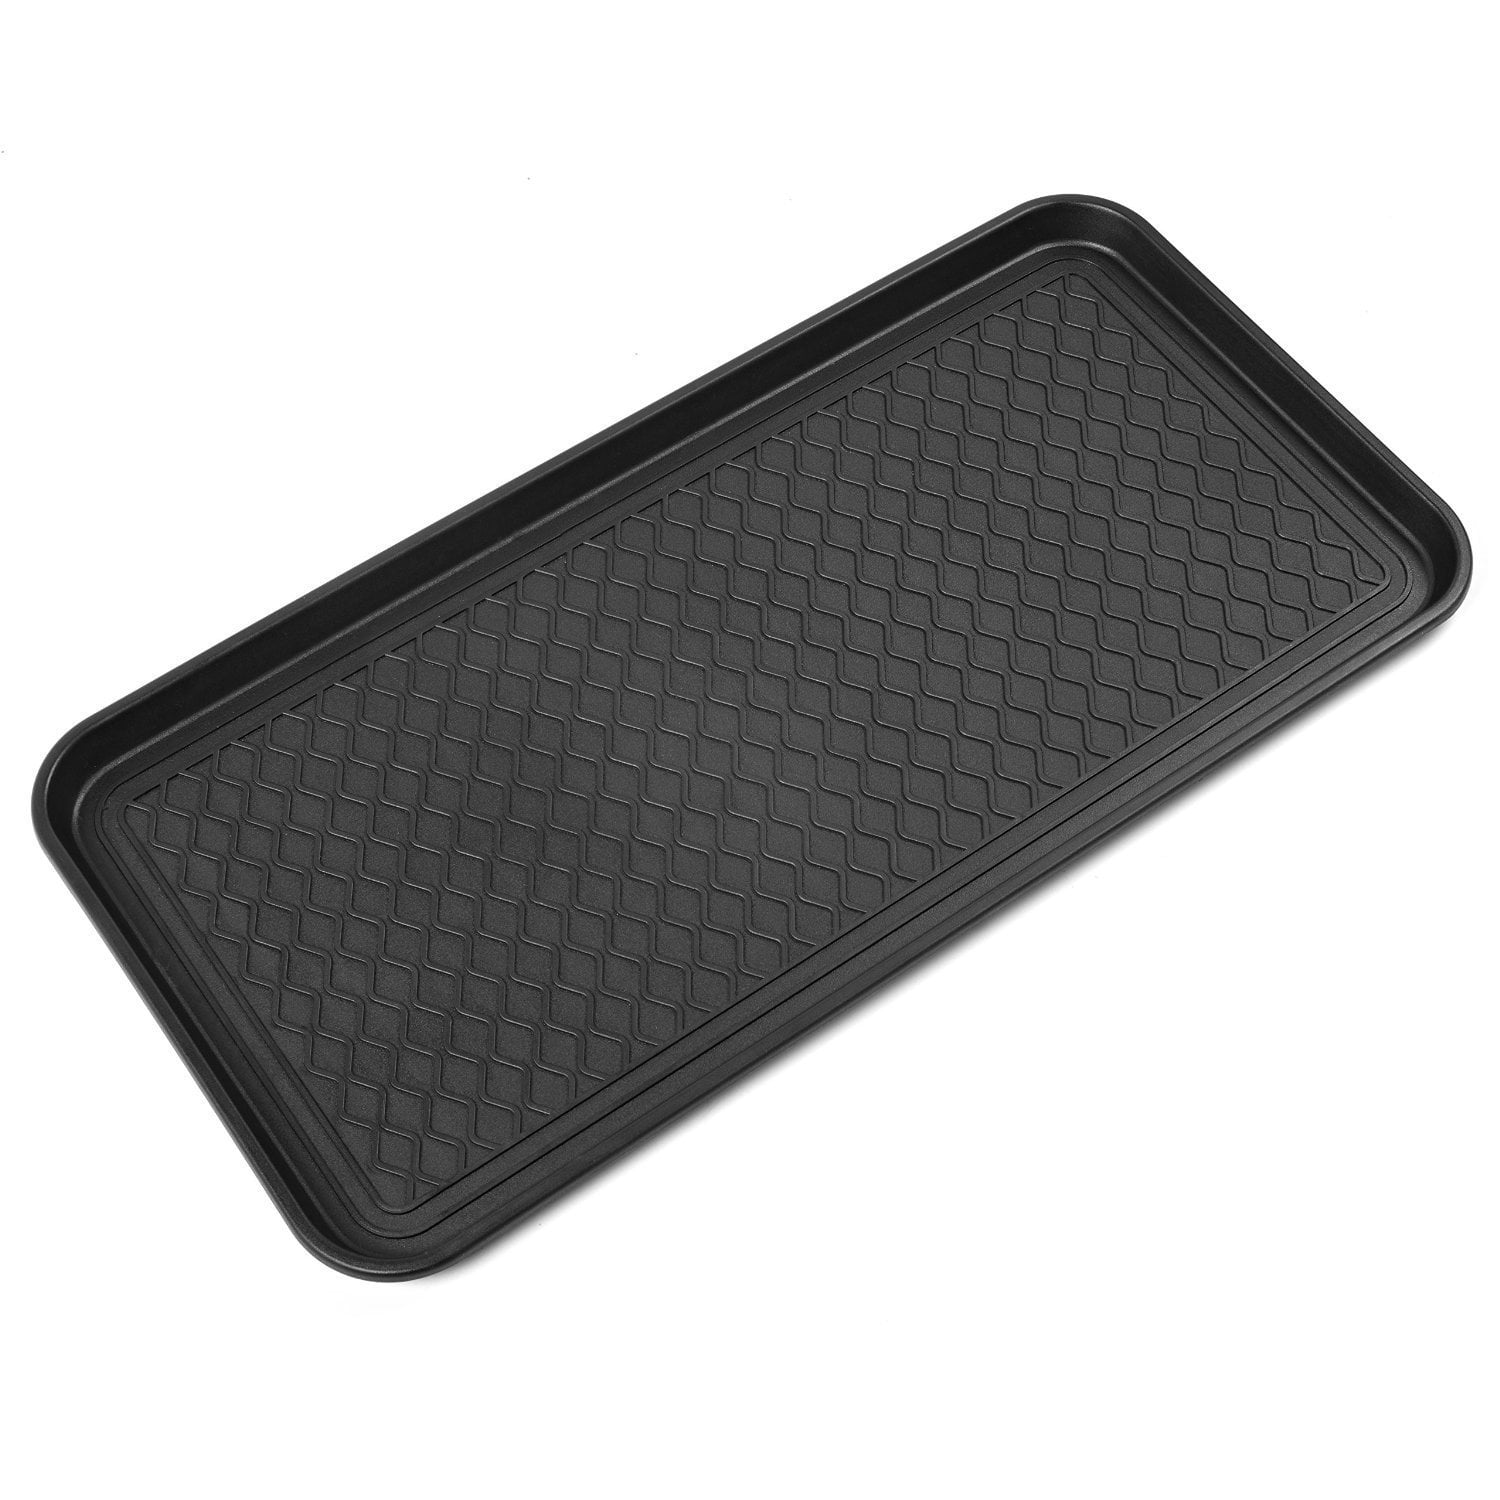 Home-Man Multi-Purpose Boot Tray Mat,Pet Bowl Tray,Dog Bowl Mat,Boot Tray for Entryway,Waterproof Trays for Indoor and Outdoor Floor Protection,80cm x